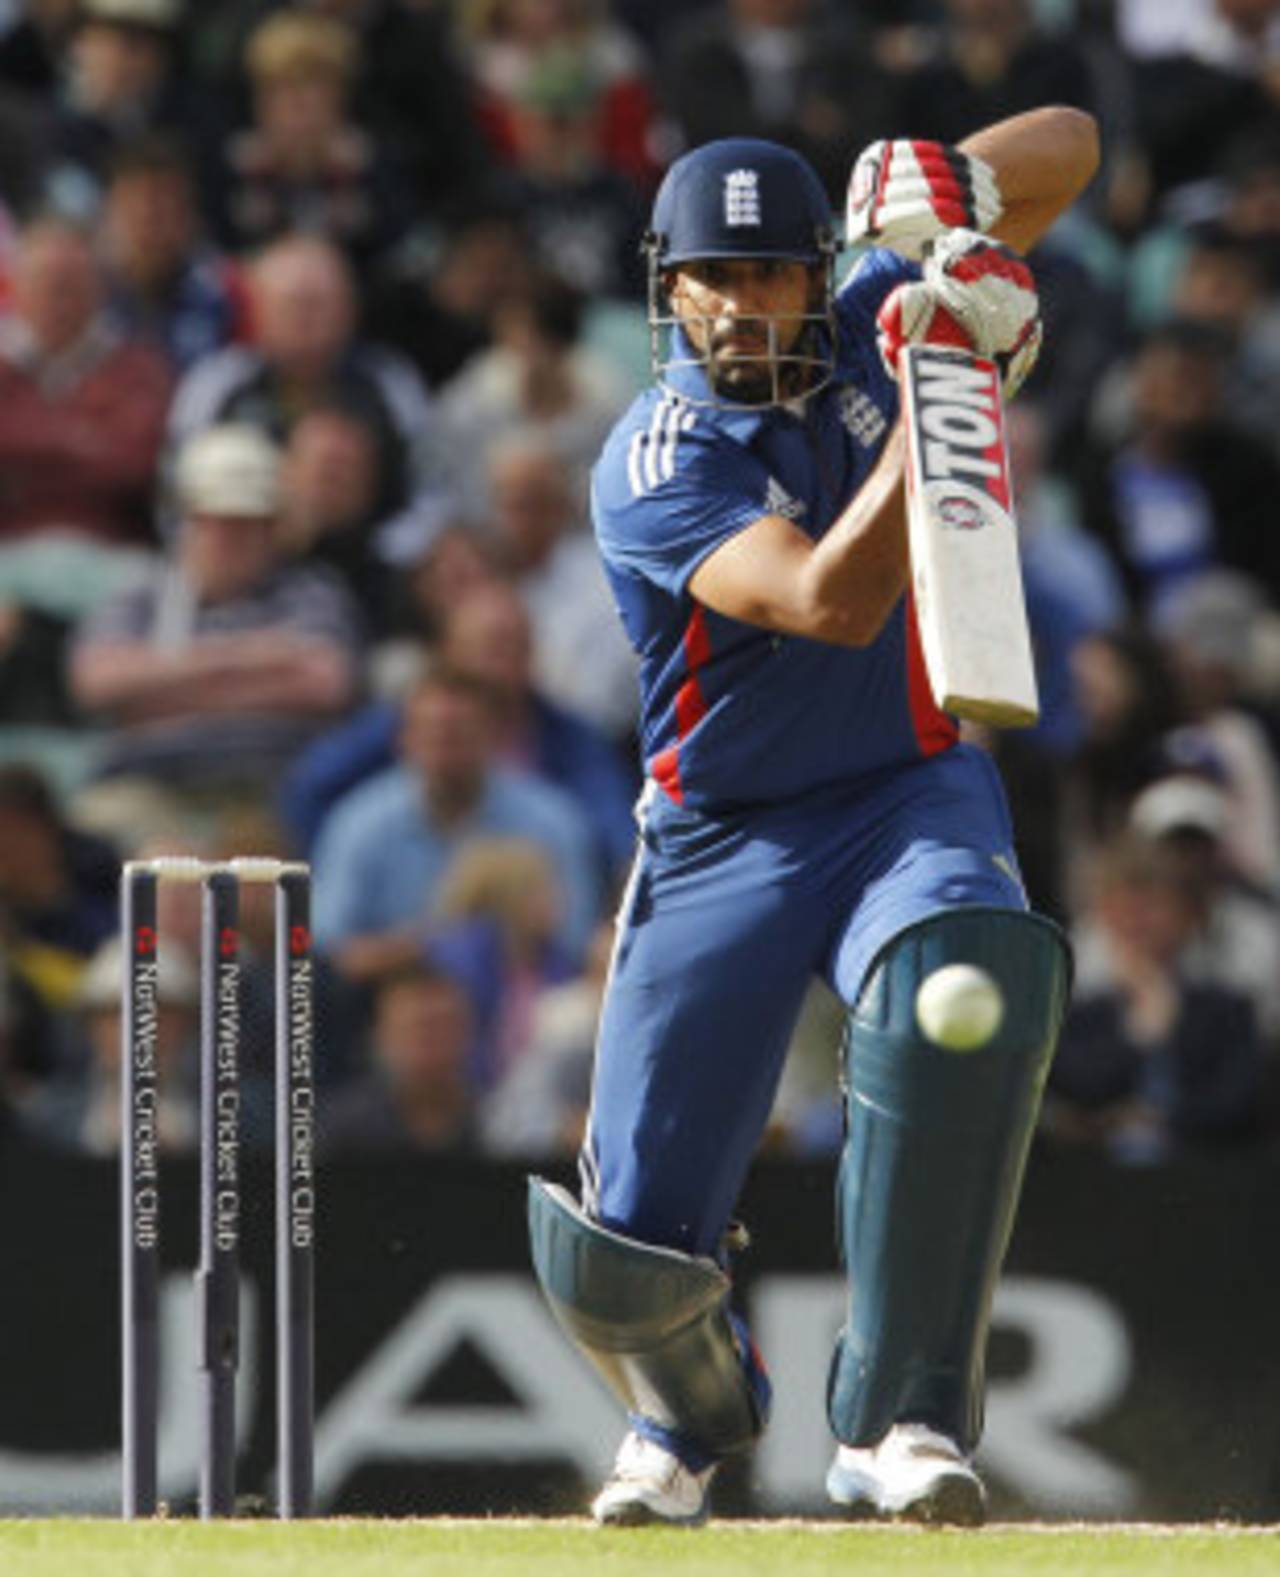 Ravi Bopara looked in good touch for his 82, England v Australia, 2nd ODI, The Oval, July 1, 2012